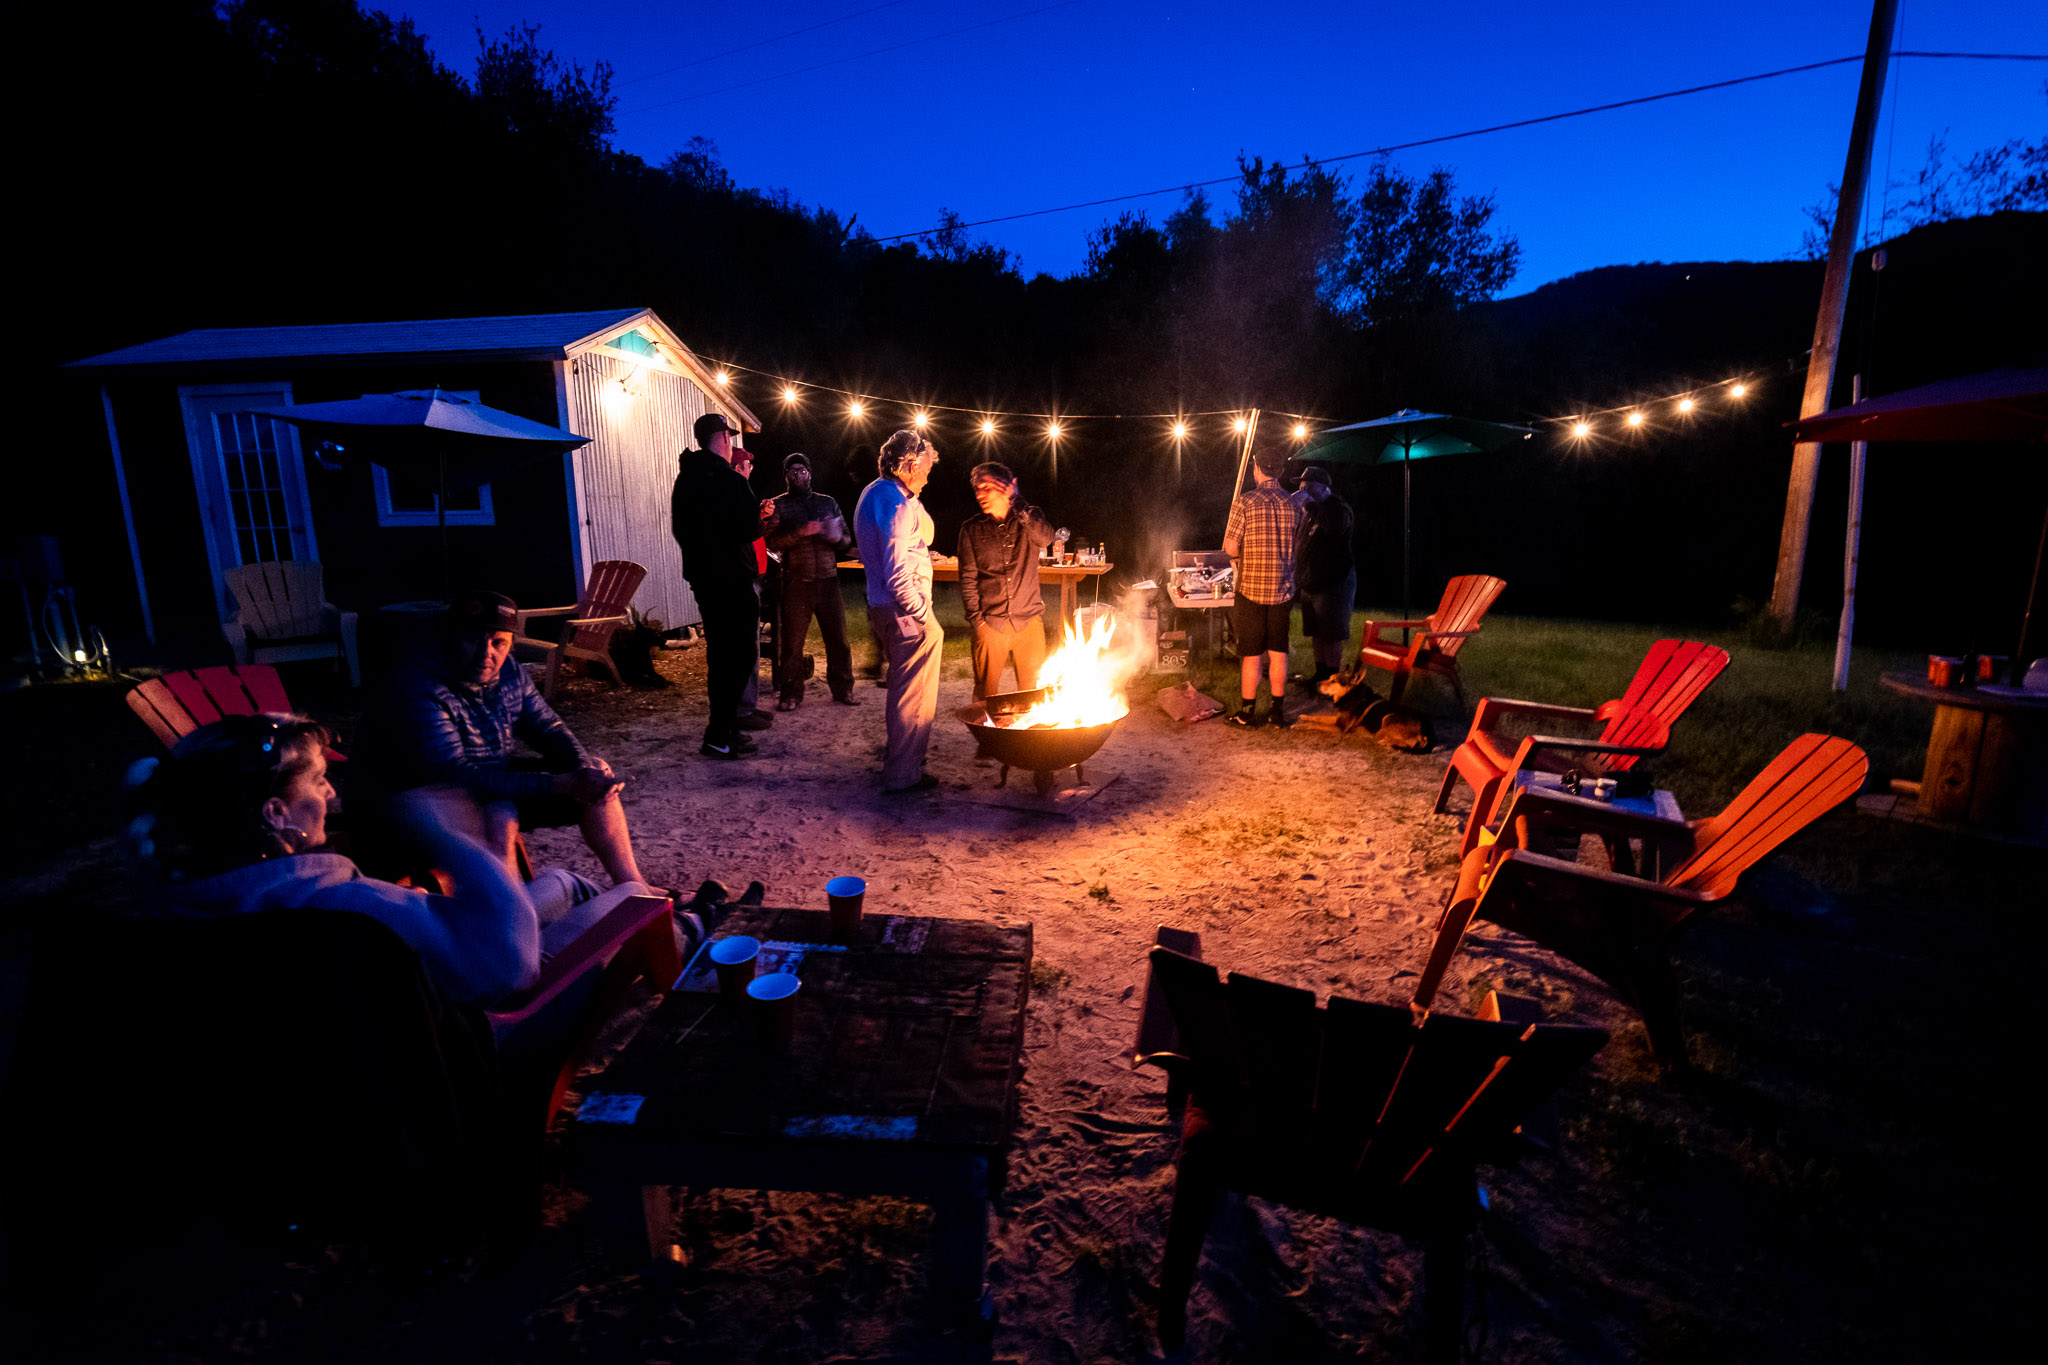 People gathered around the fire in the evening at the 2019 OTE Pre Otter party at Solosjuntos near Monterey.